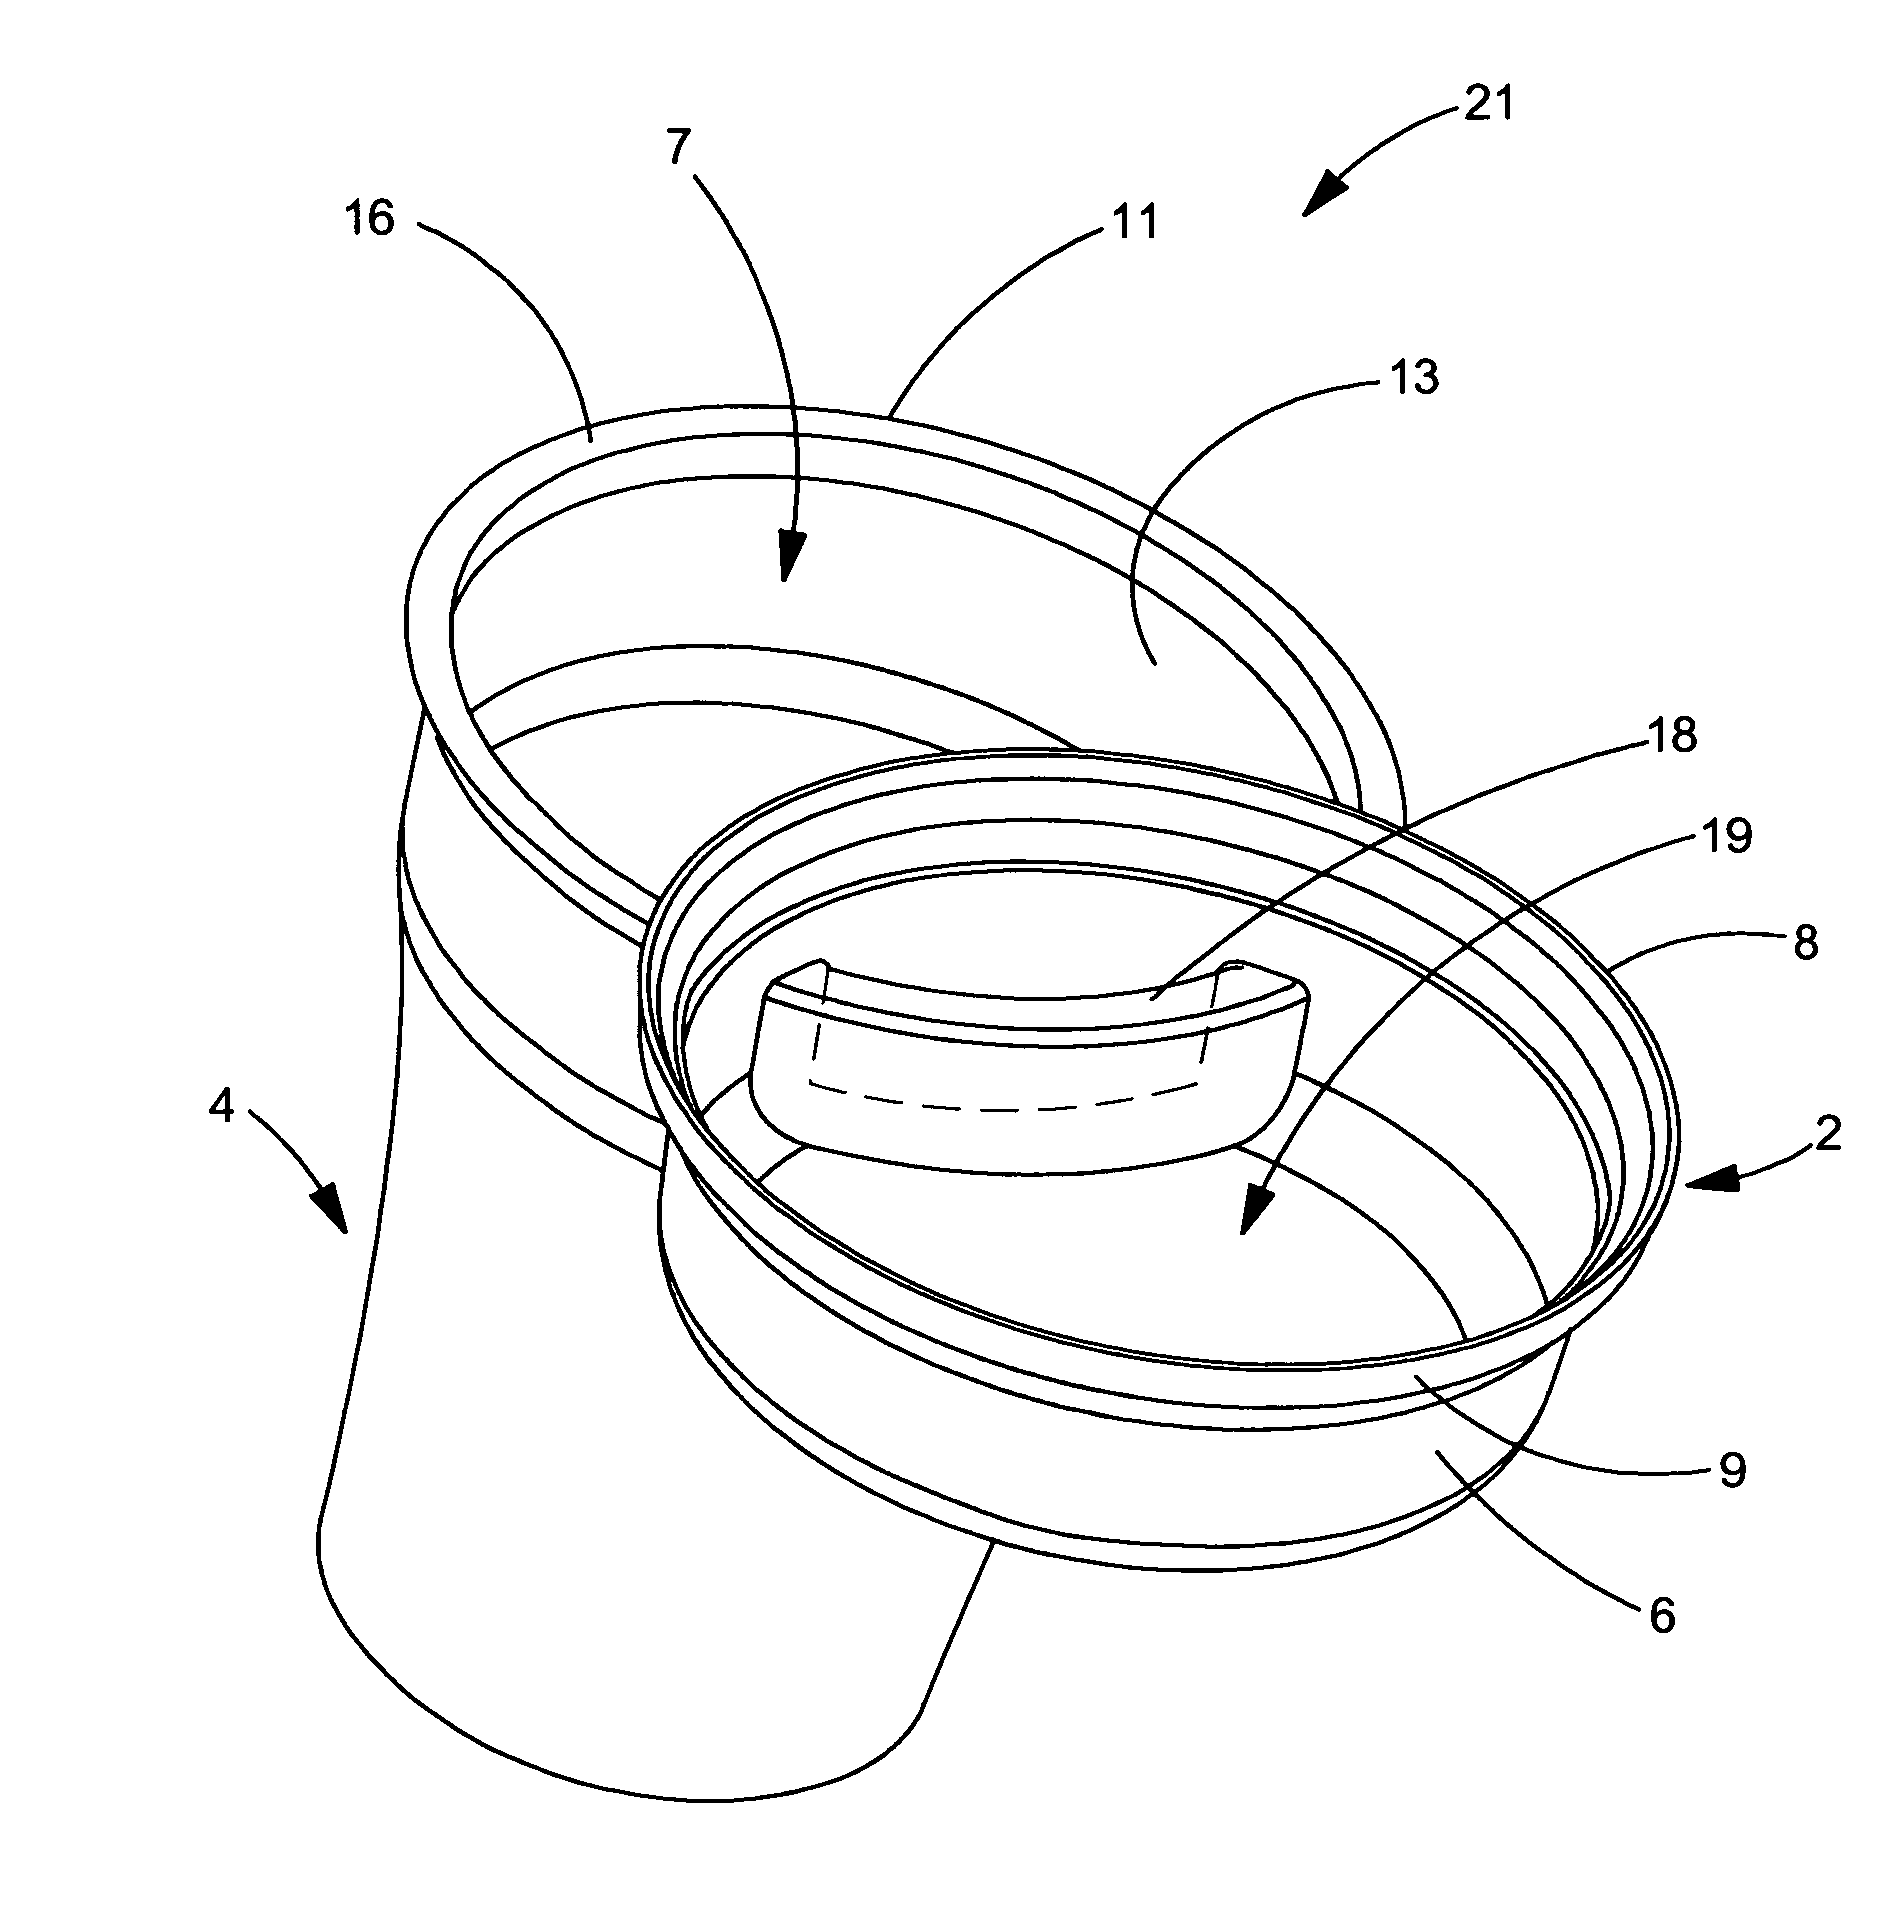 Interconnecting food container system